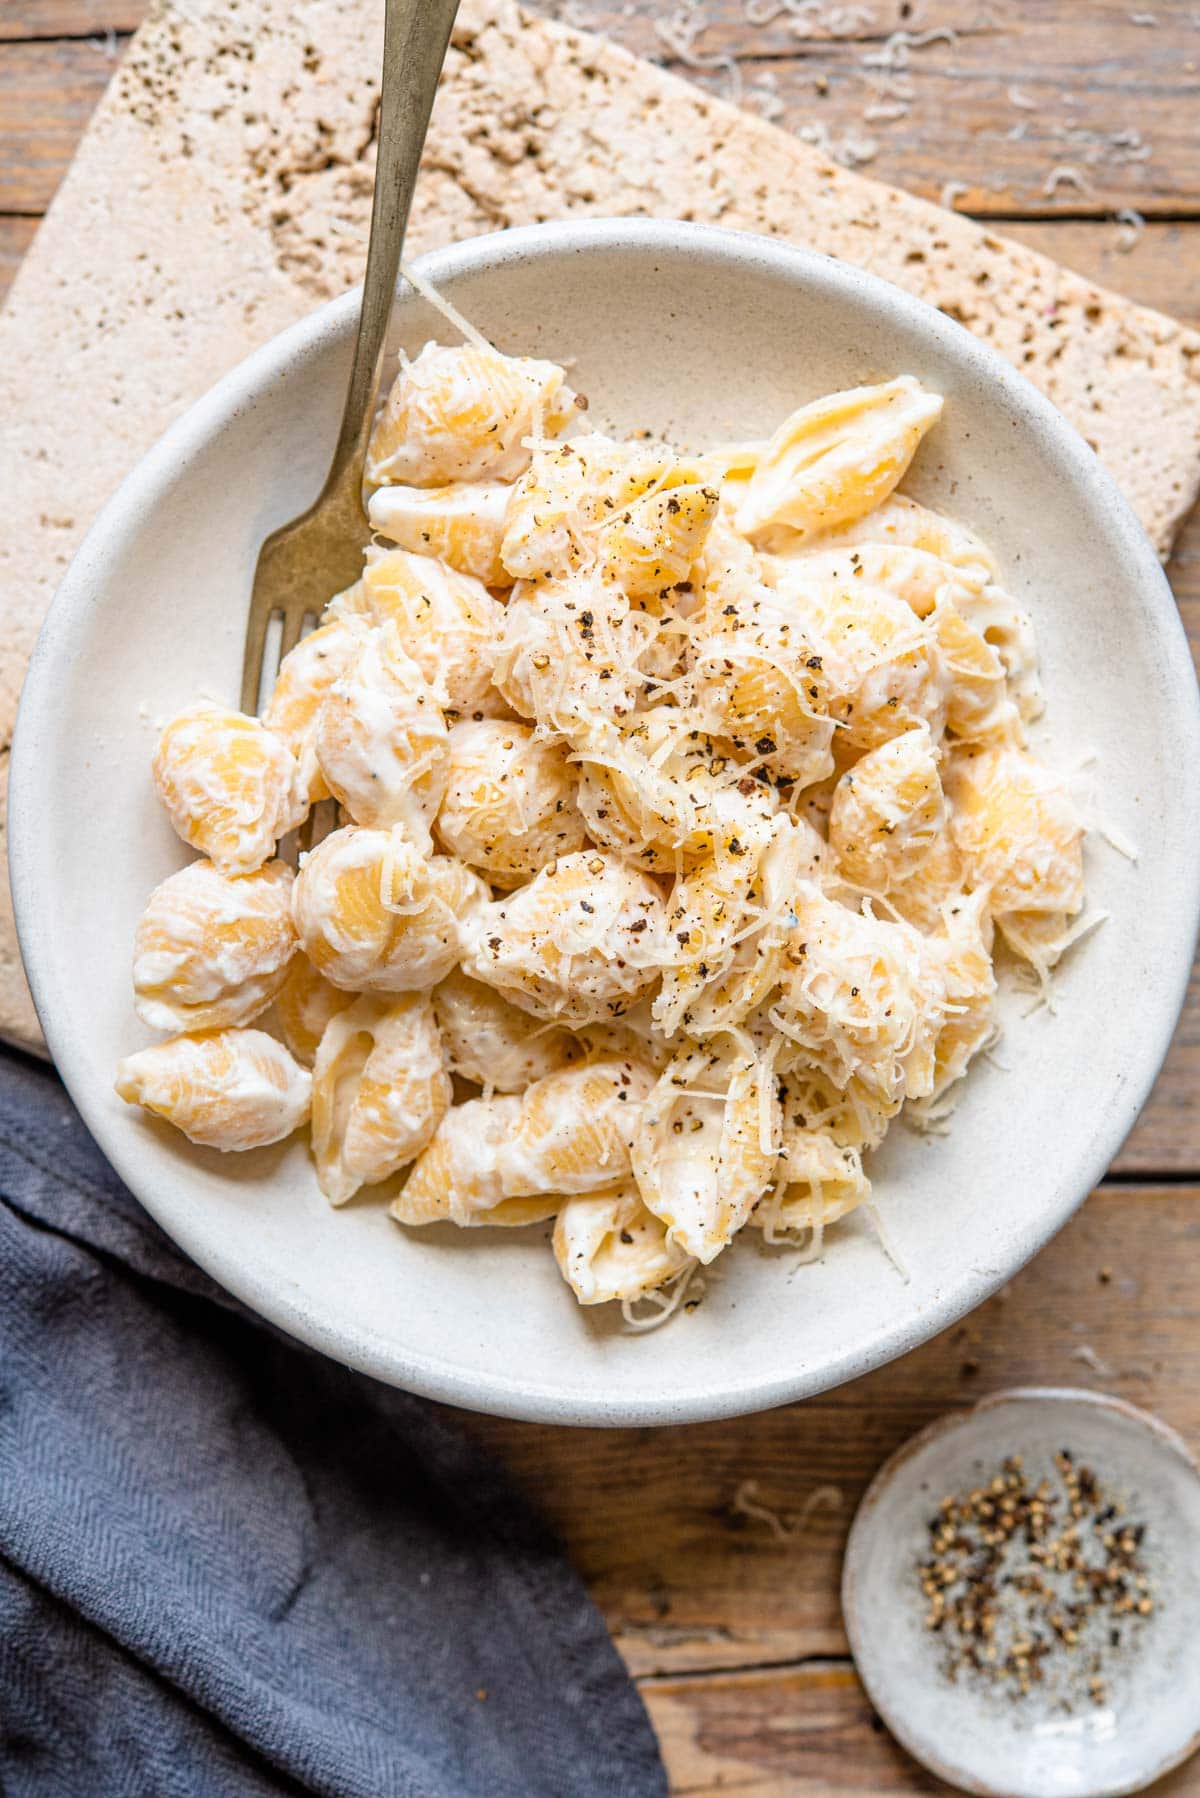 An overhead shot of ricotta pasta in a rustic bowl sitting on a wooden surface